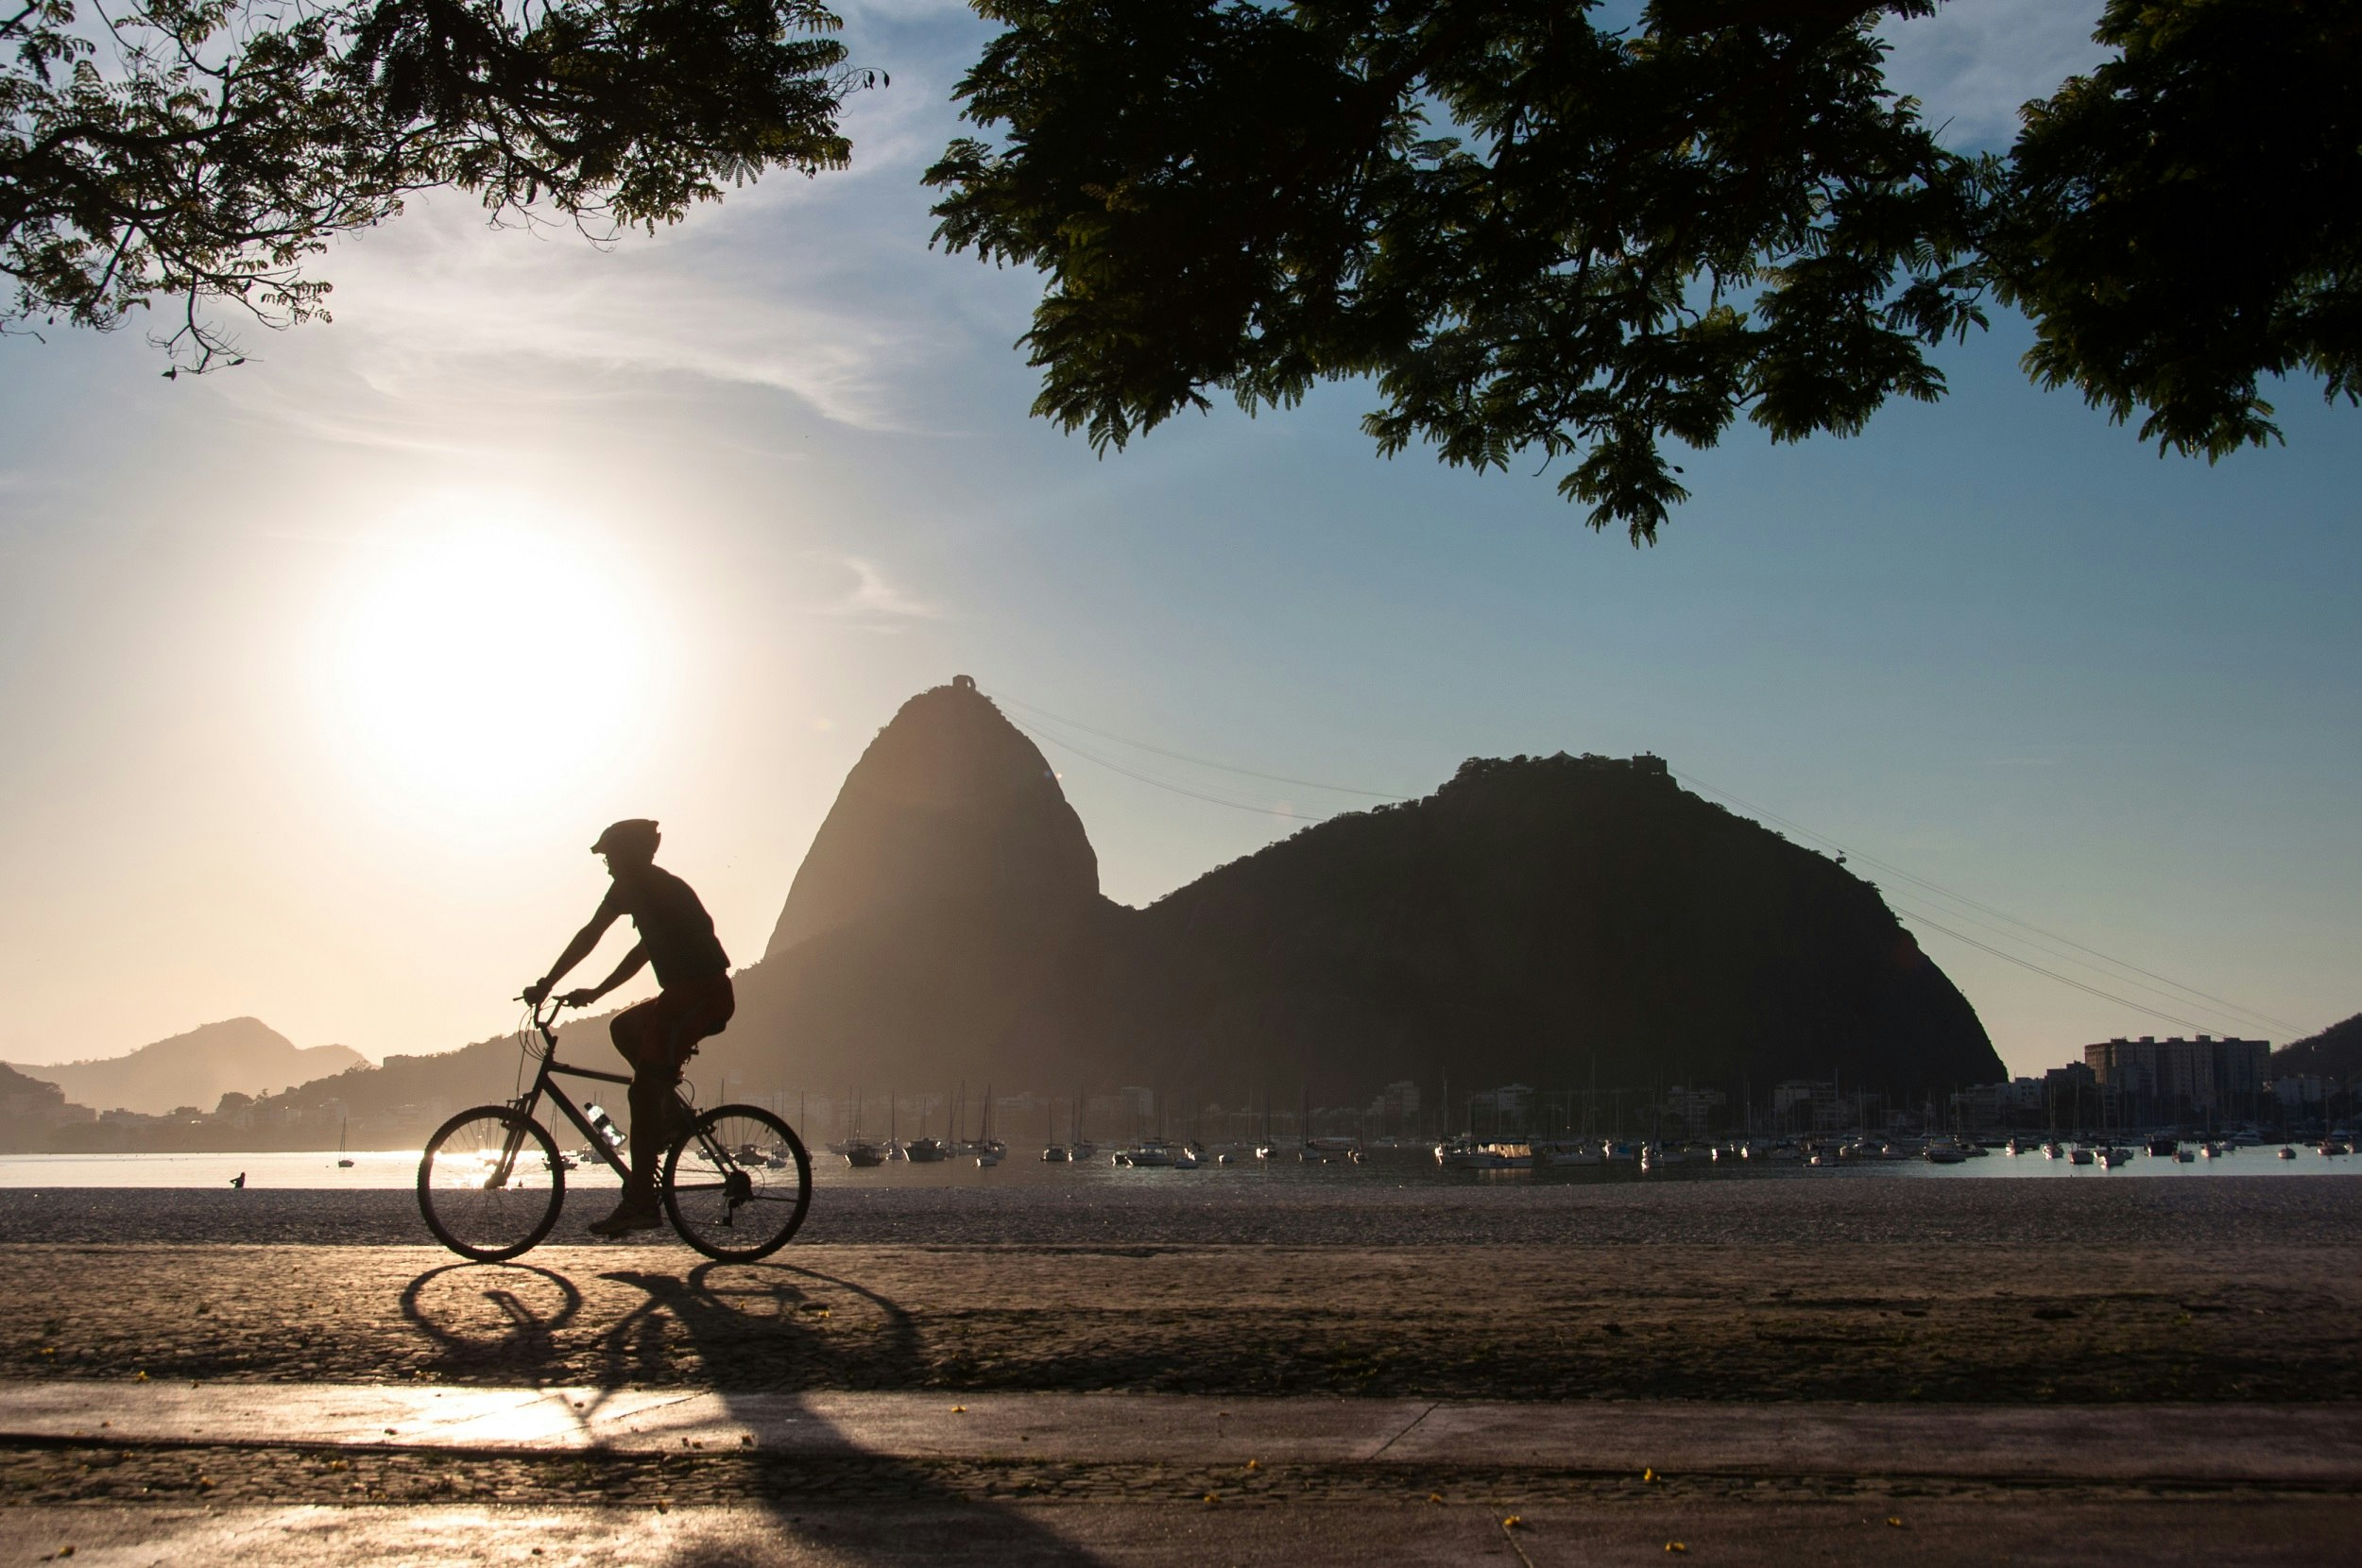 Silhouette of a Man Cycling in the Early Morning during Beautiful Warm Sunrise in Rio de Janeiro with Sugarloaf Mountain in the Horizon.